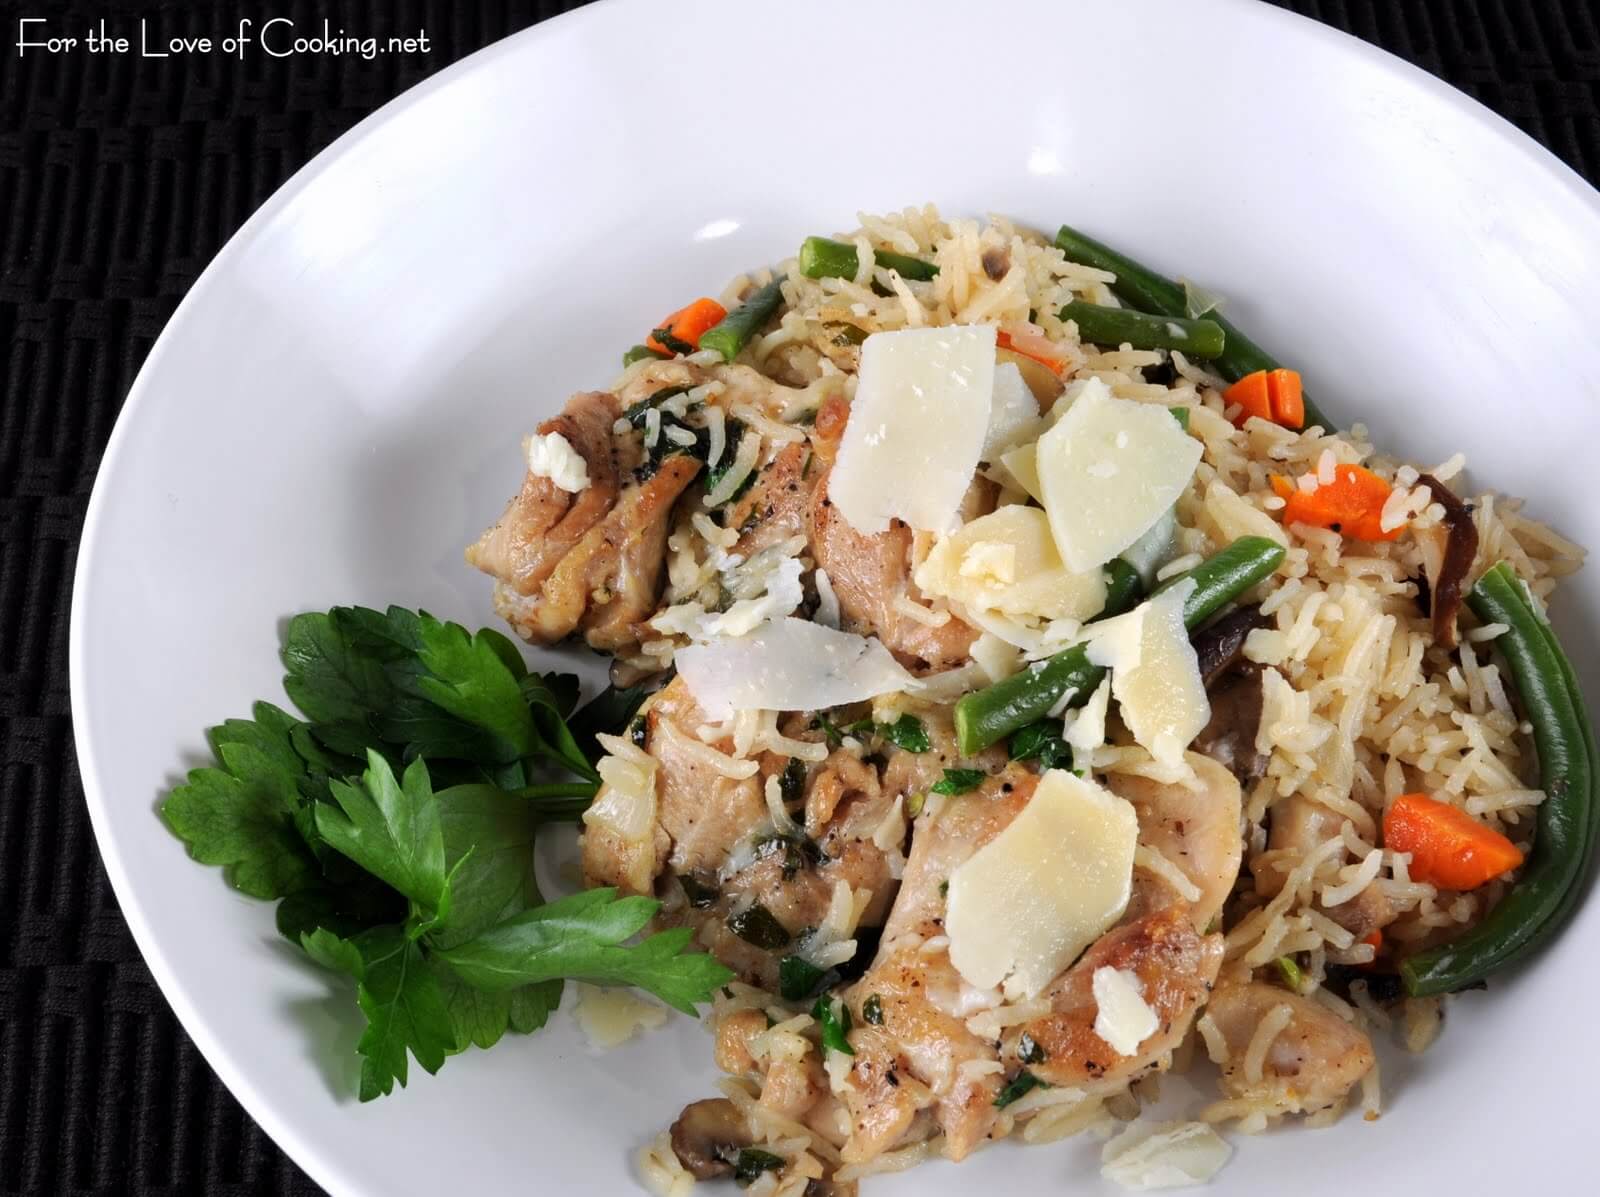 RECIPES FOR GROUND CHICKEN AND RICE